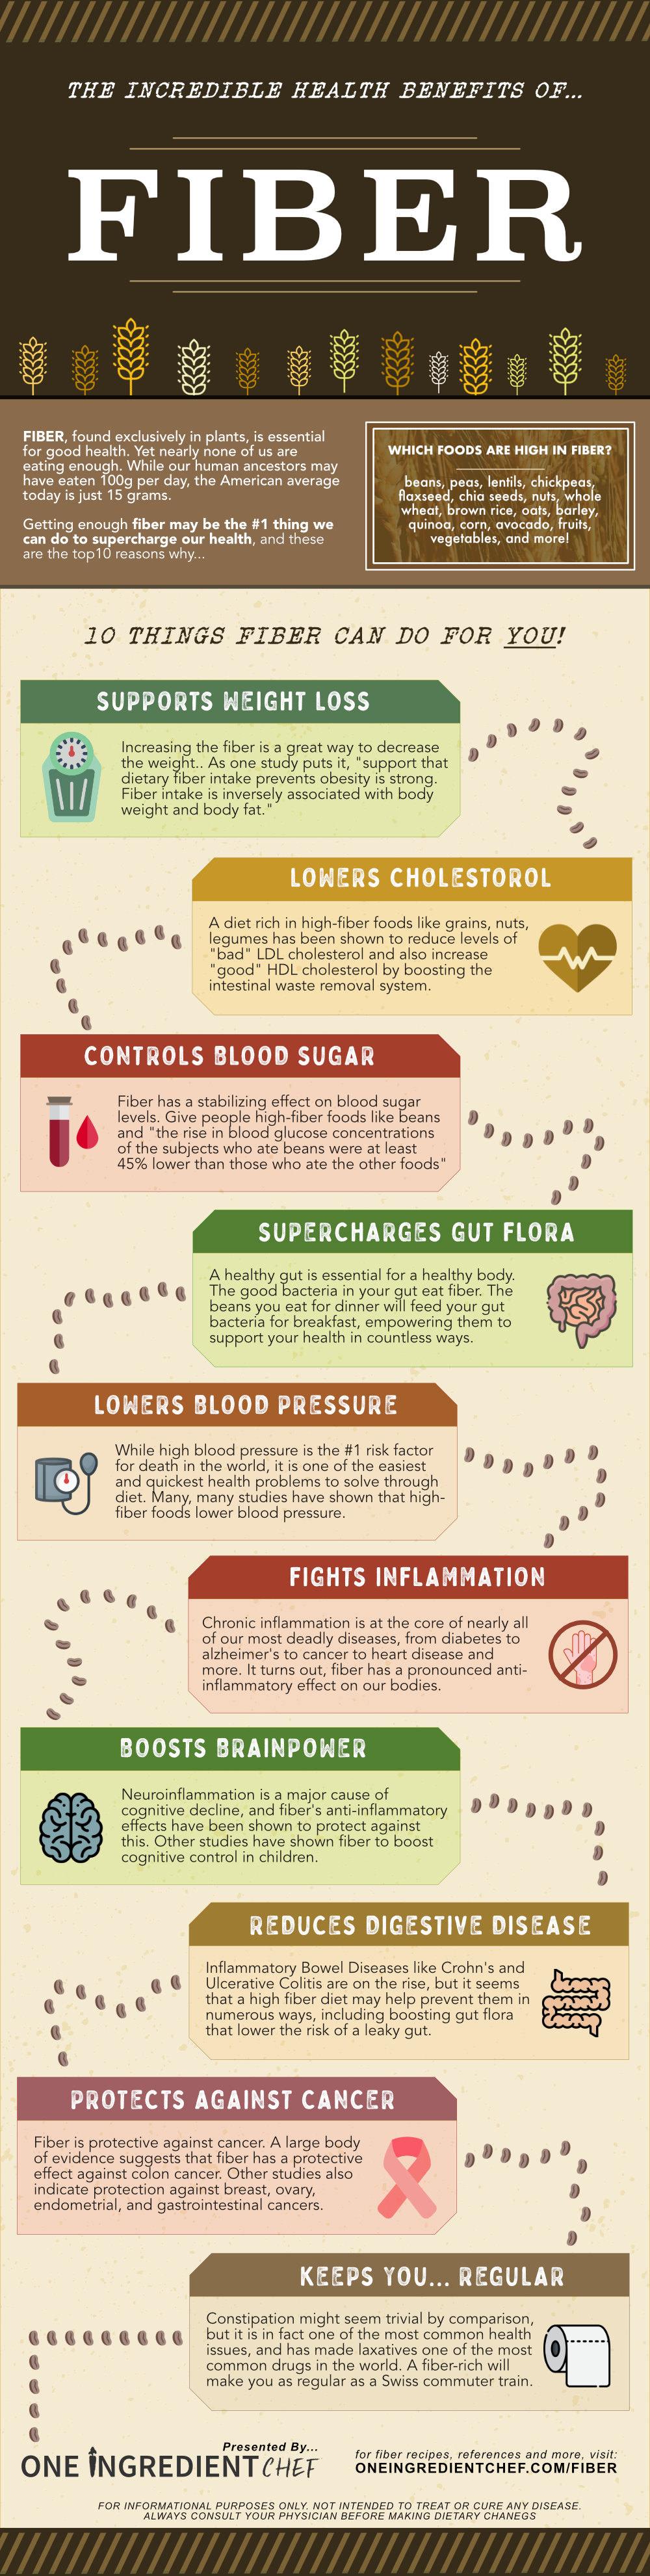 10 Reasons Why a High-Fiber Diet is Not Negotiable! - Infographic